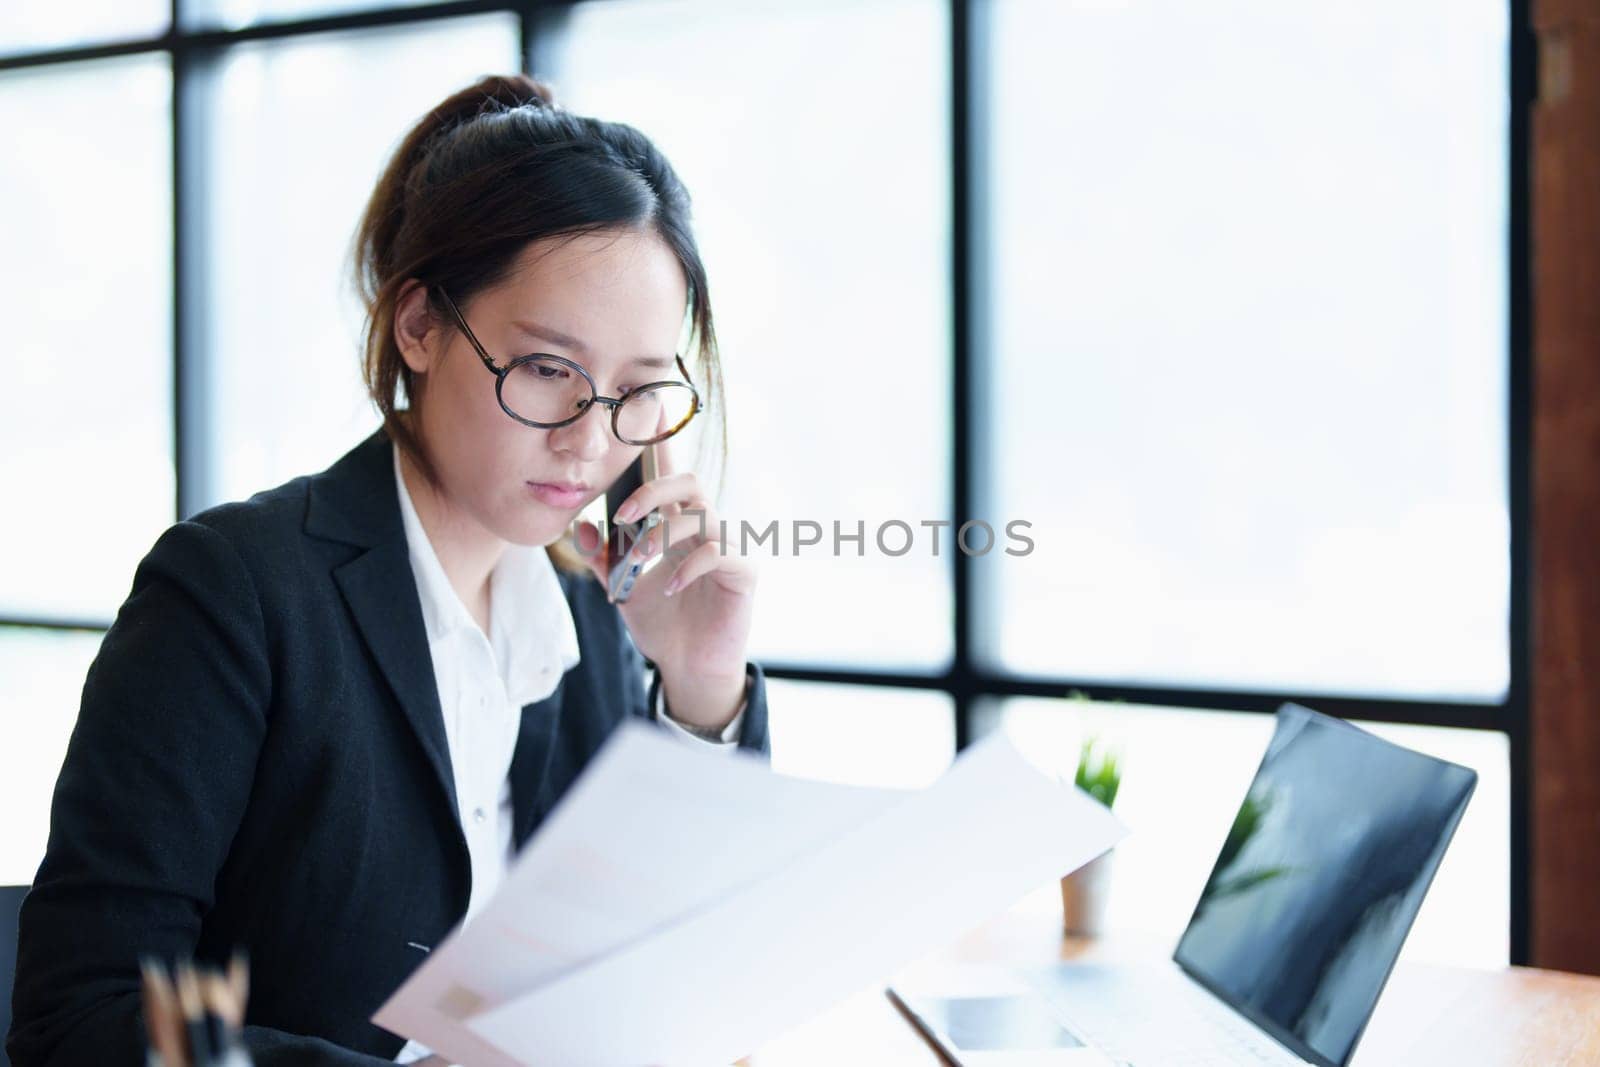 Portrait of a young Asian woman showing a serious face as she uses her phone, financial documents and computer laptop on her desk in the early morning hours by Manastrong